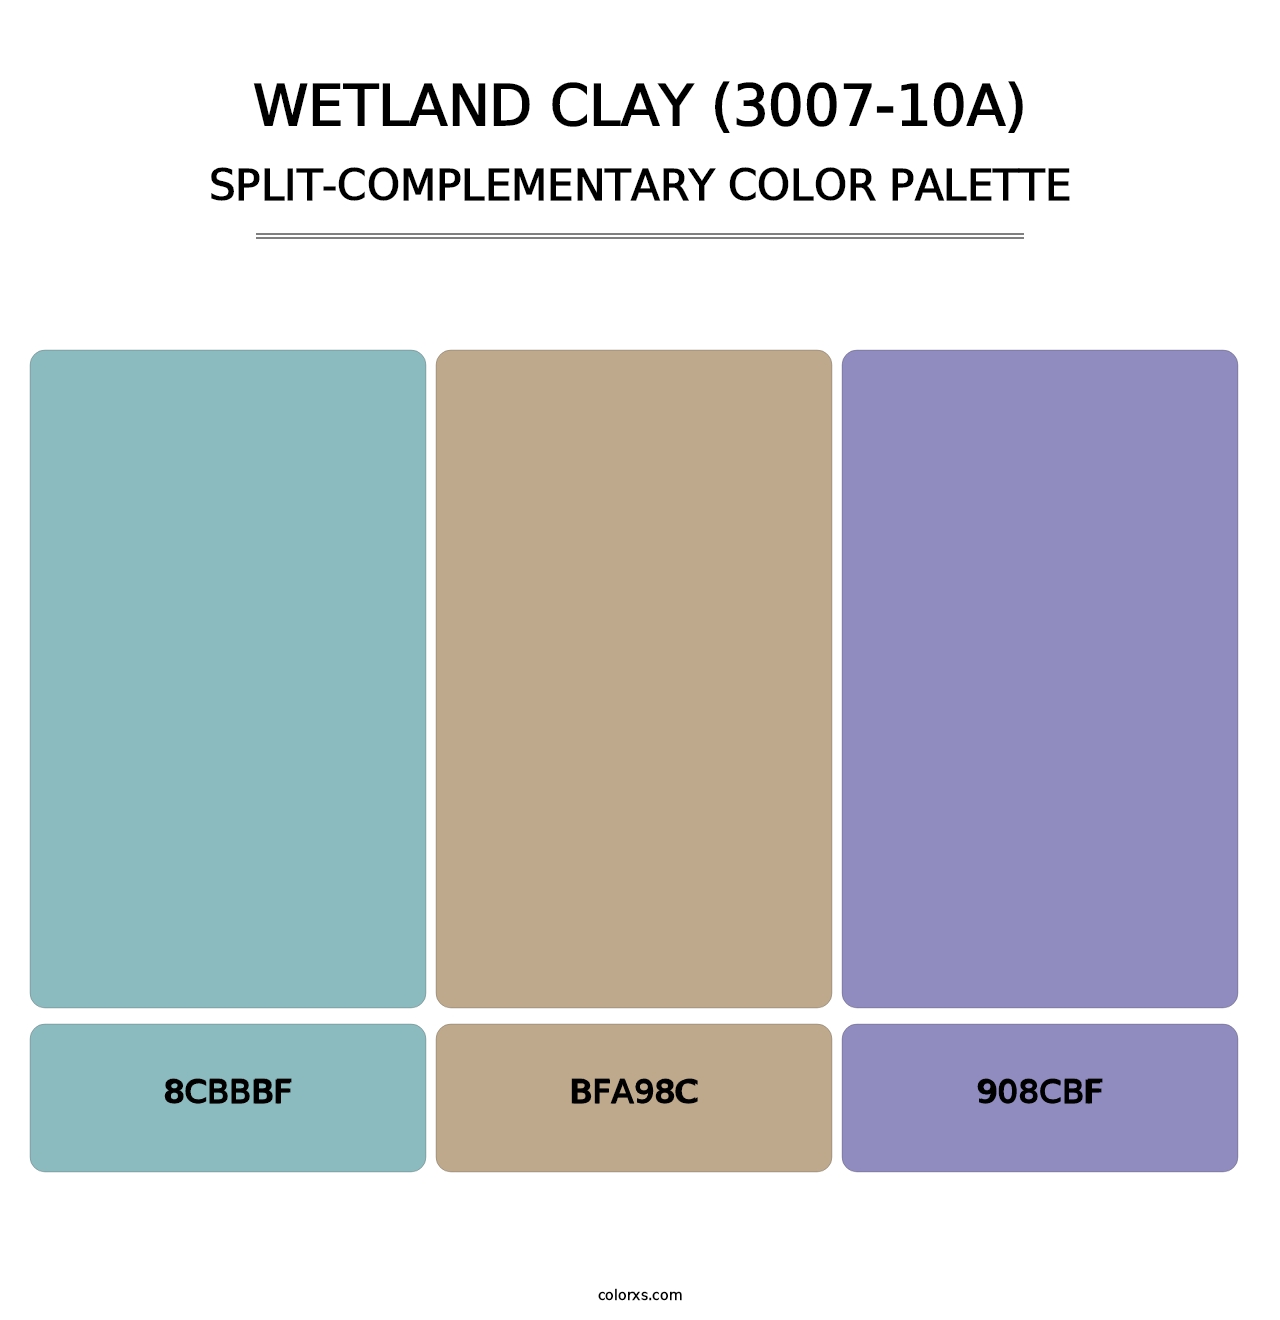 Wetland Clay (3007-10A) - Split-Complementary Color Palette